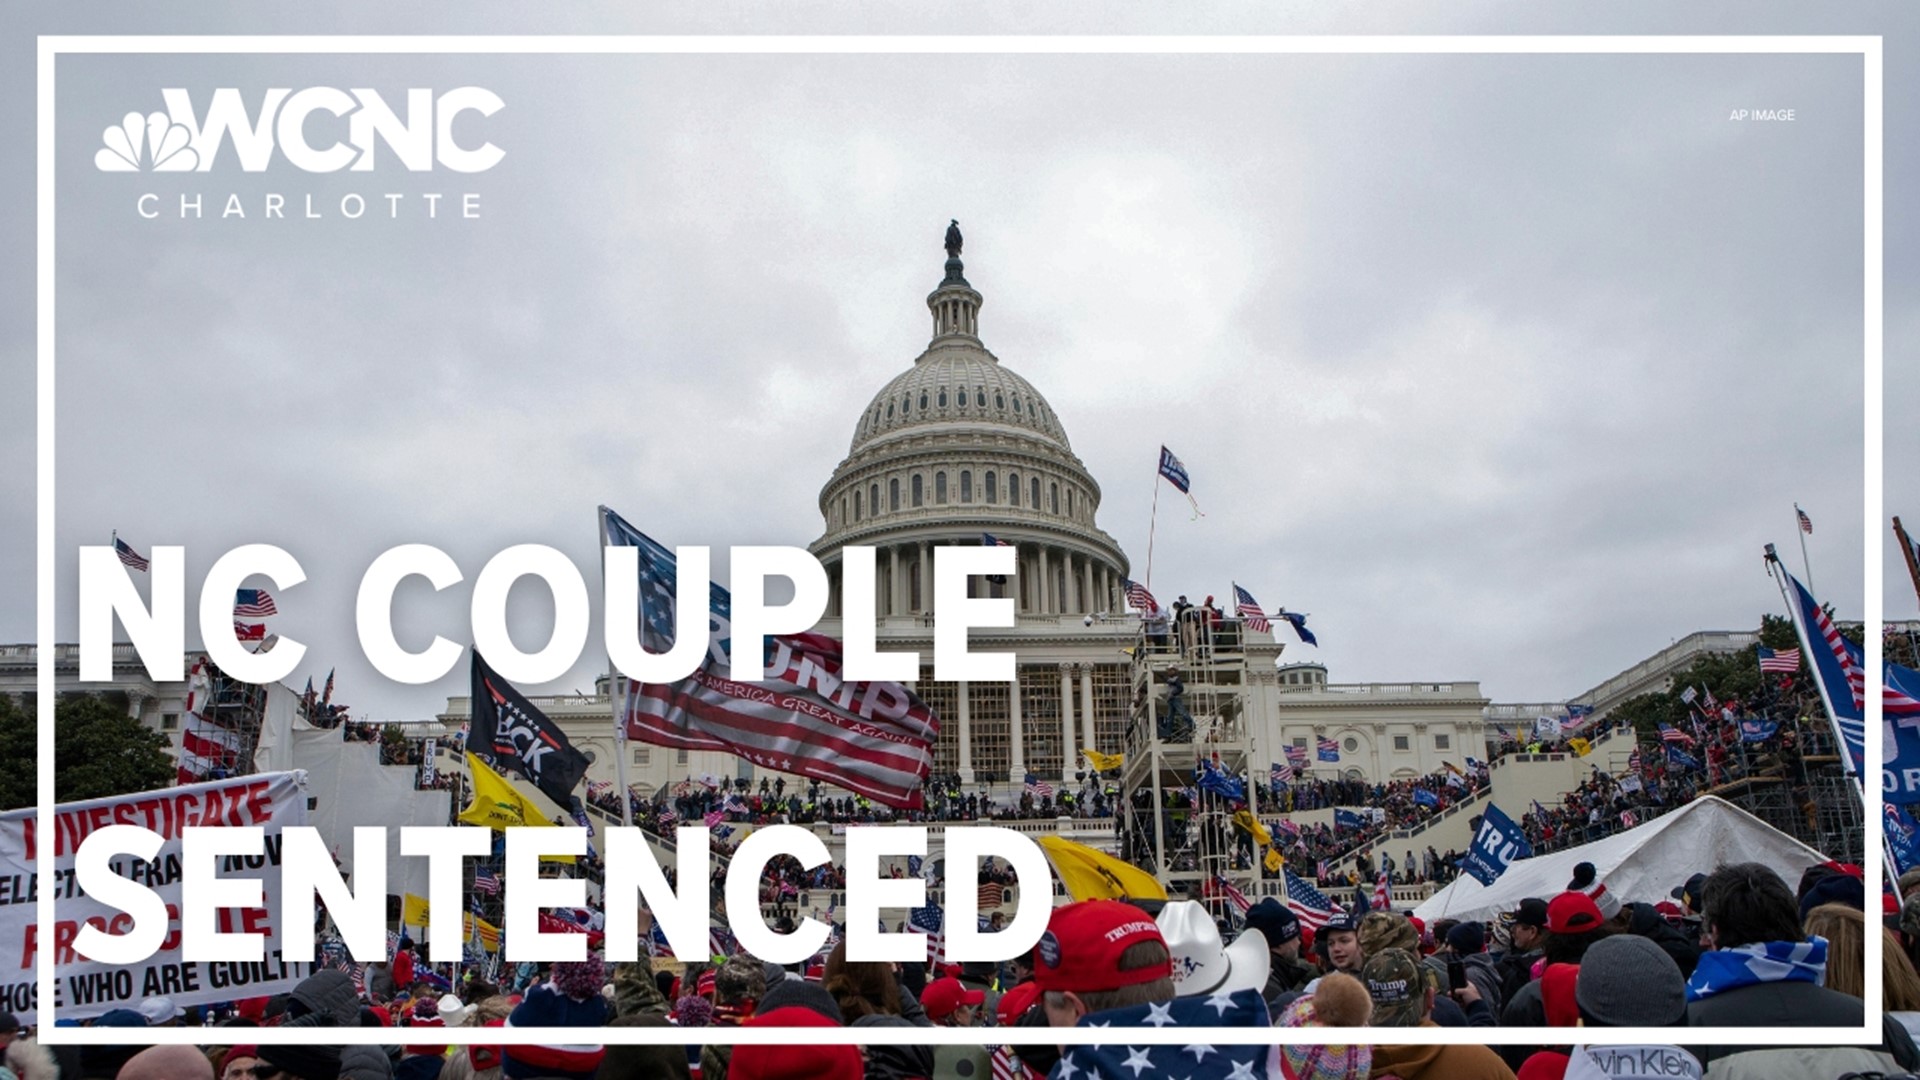 Dale Shalvey and his wife, Tara Stottlemyer, were sentenced to prison for their role in the riot at the U.S. Capitol on Jan. 6, 2021.